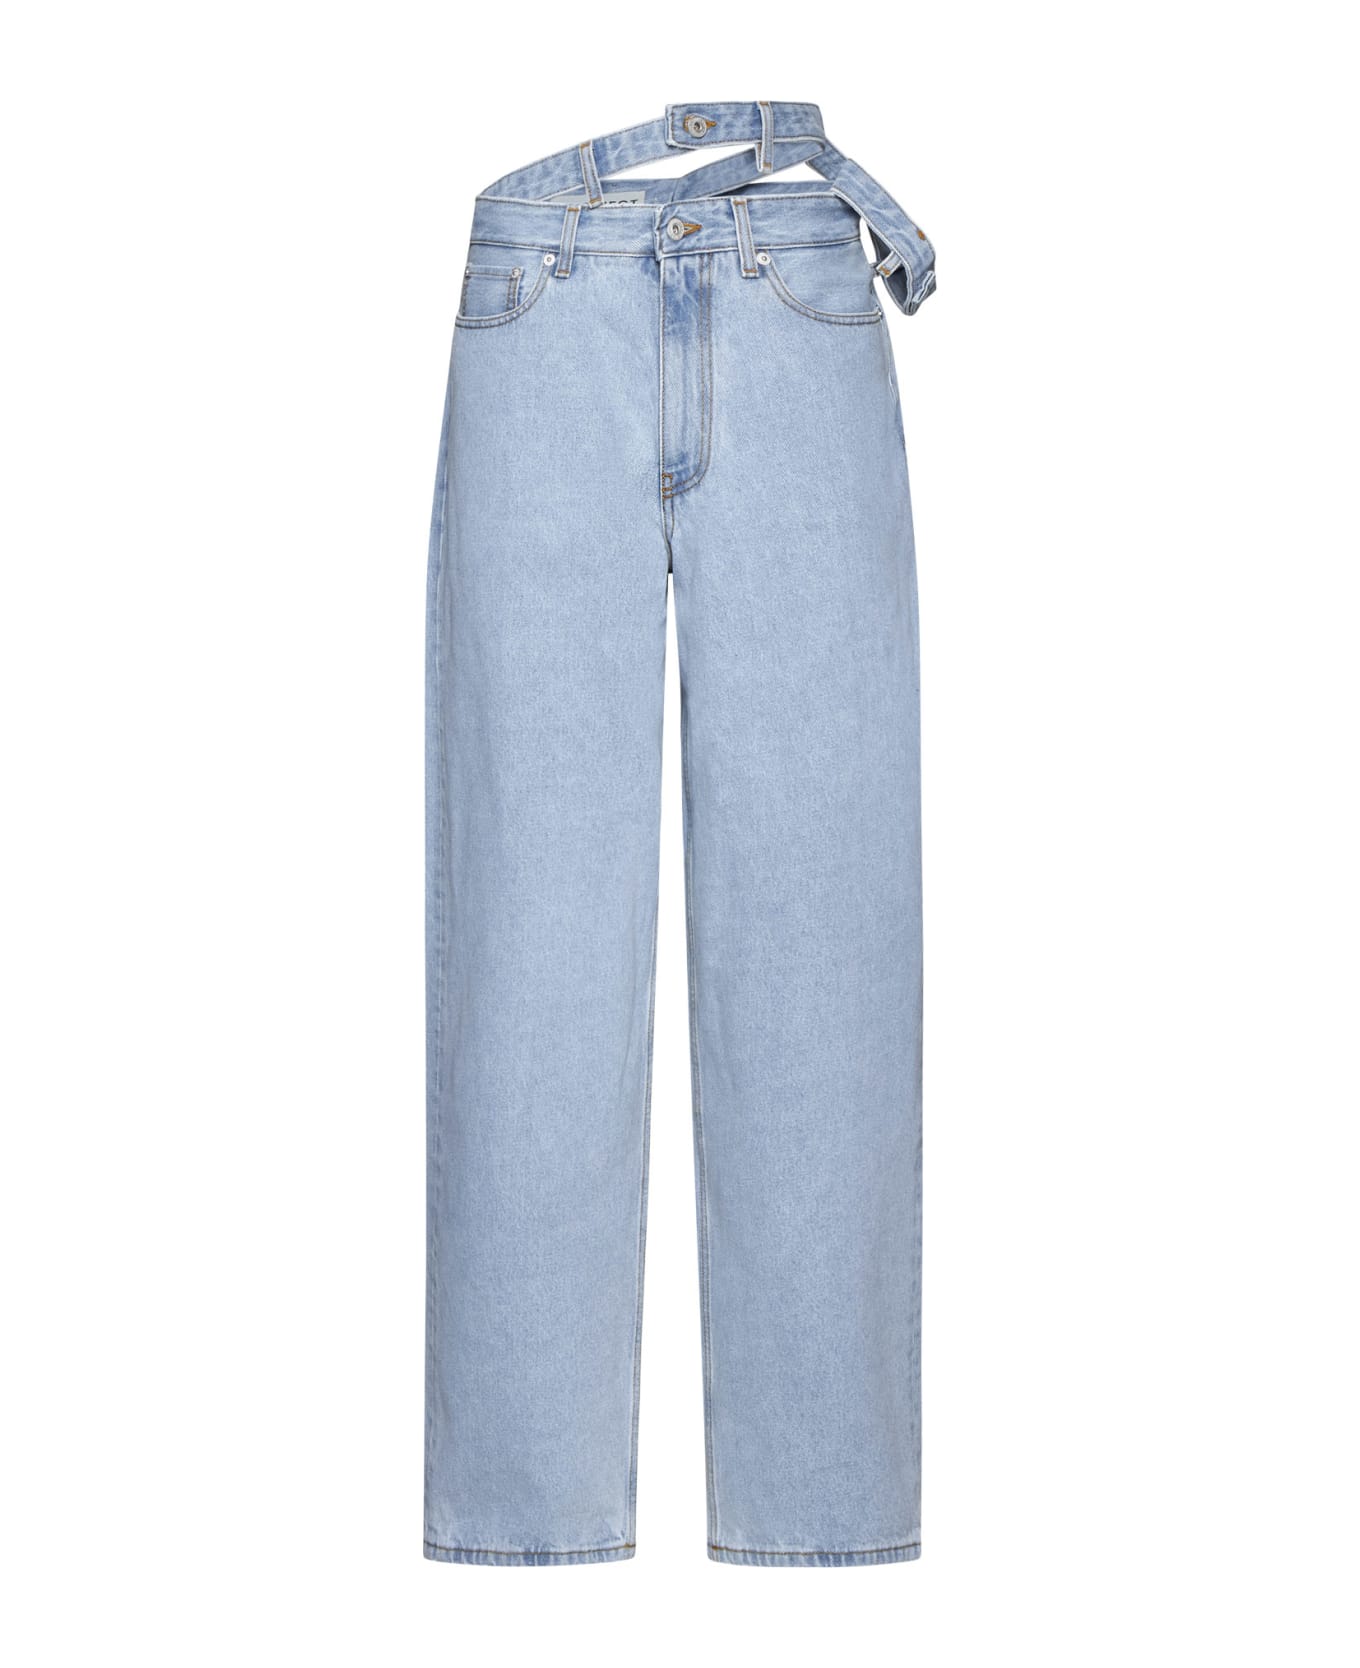 Y/Project Jeans - Evergreen ice blue デニム